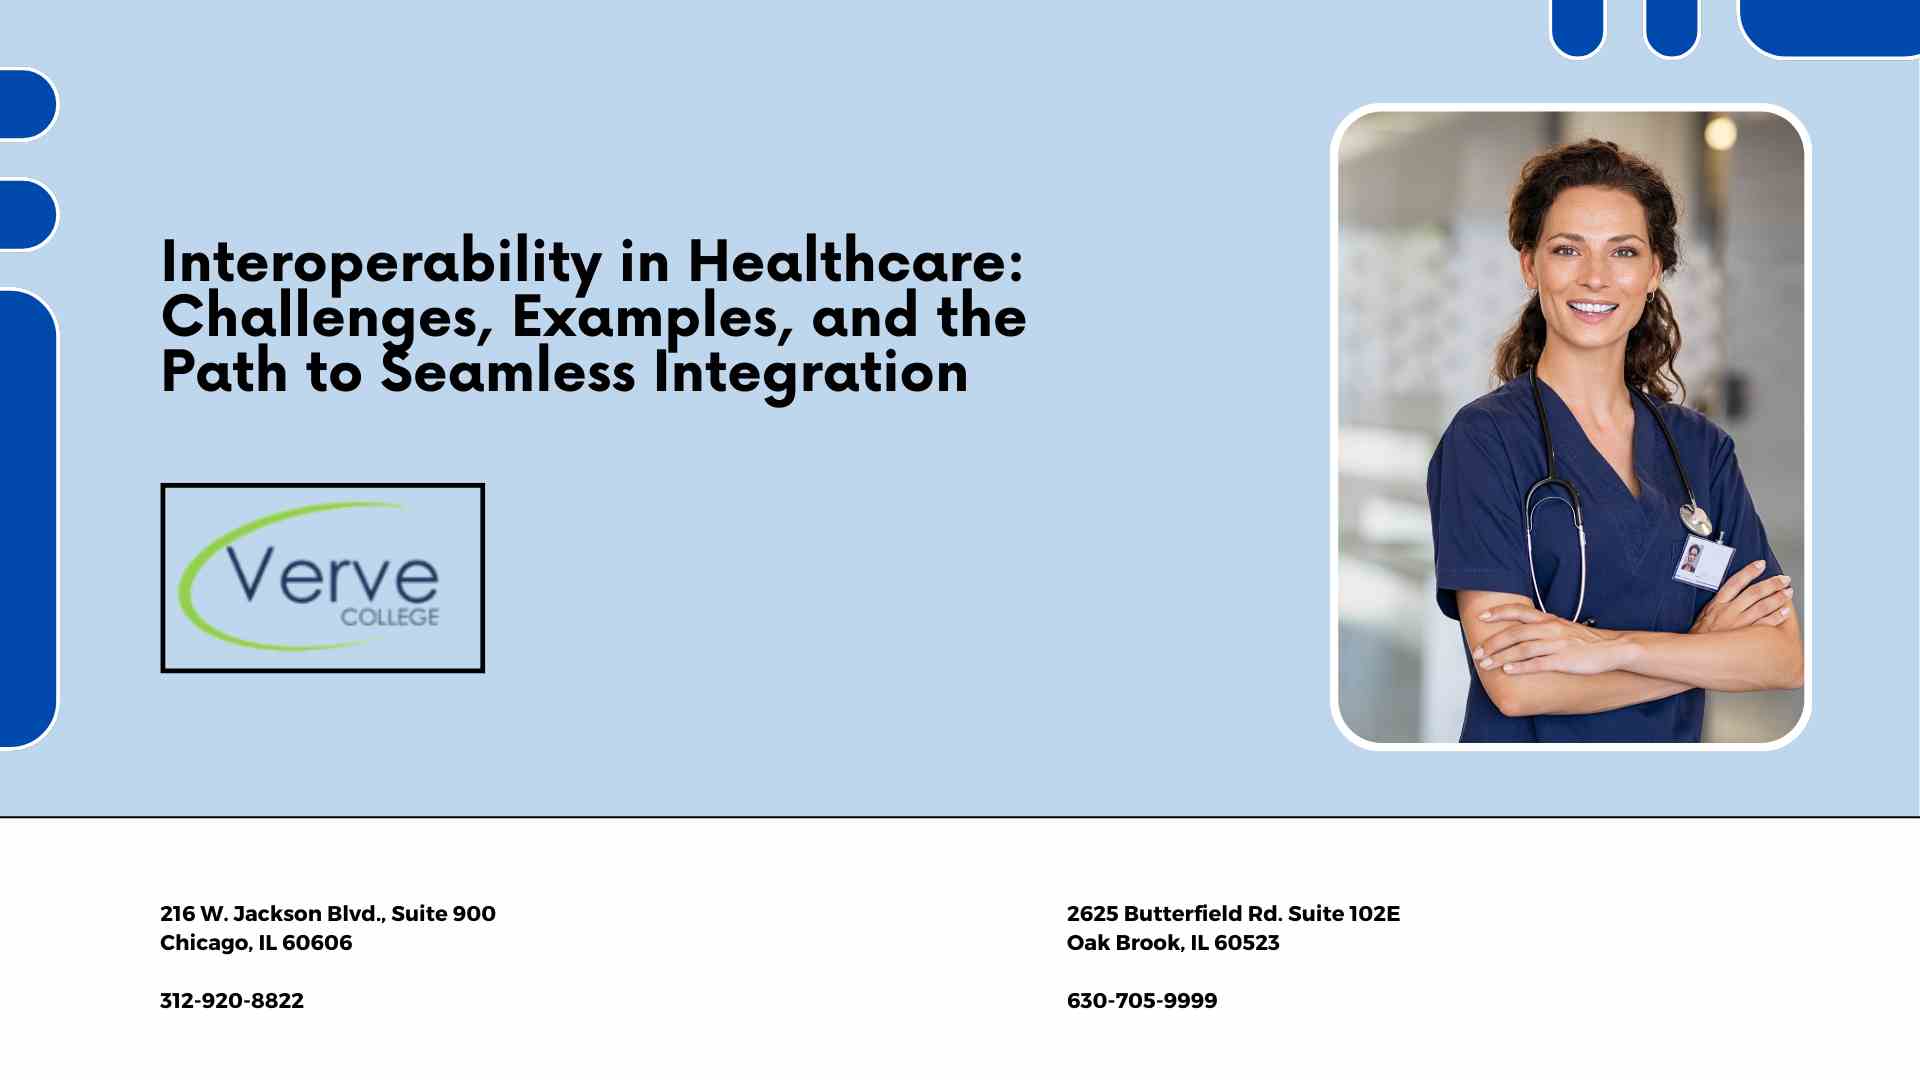 Interoperability in Healthcare: Challenges, Examples, and the Path to Seamless Integration